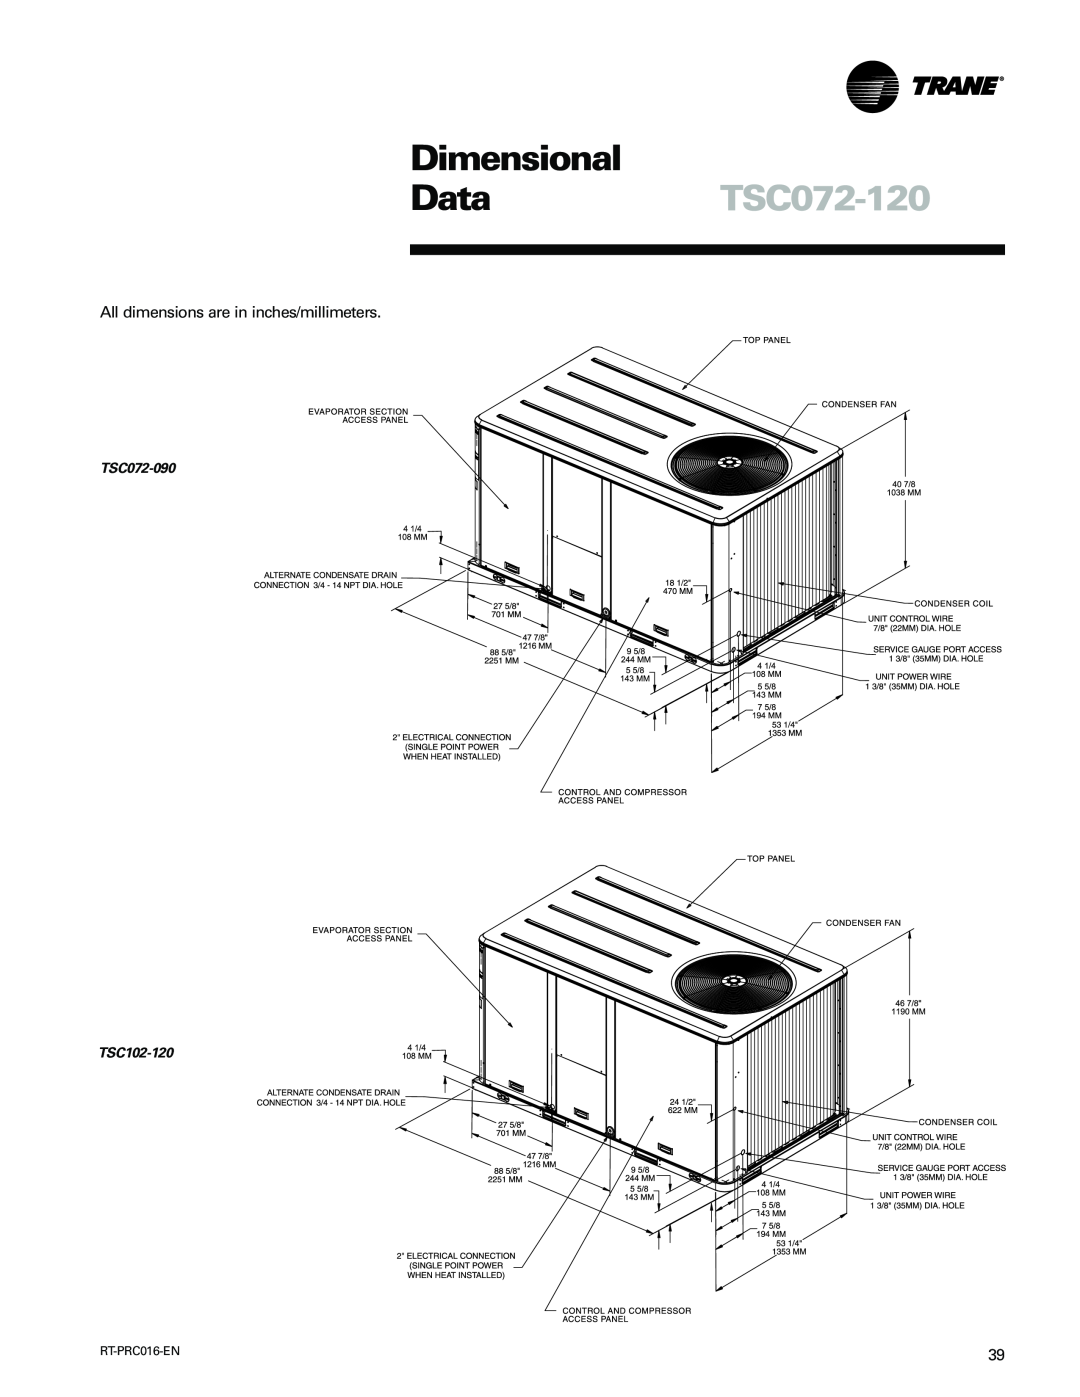 Trane TSC060-120 manual DataTSC072-120, Dimensional, All dimensions are in inches/millimeters 